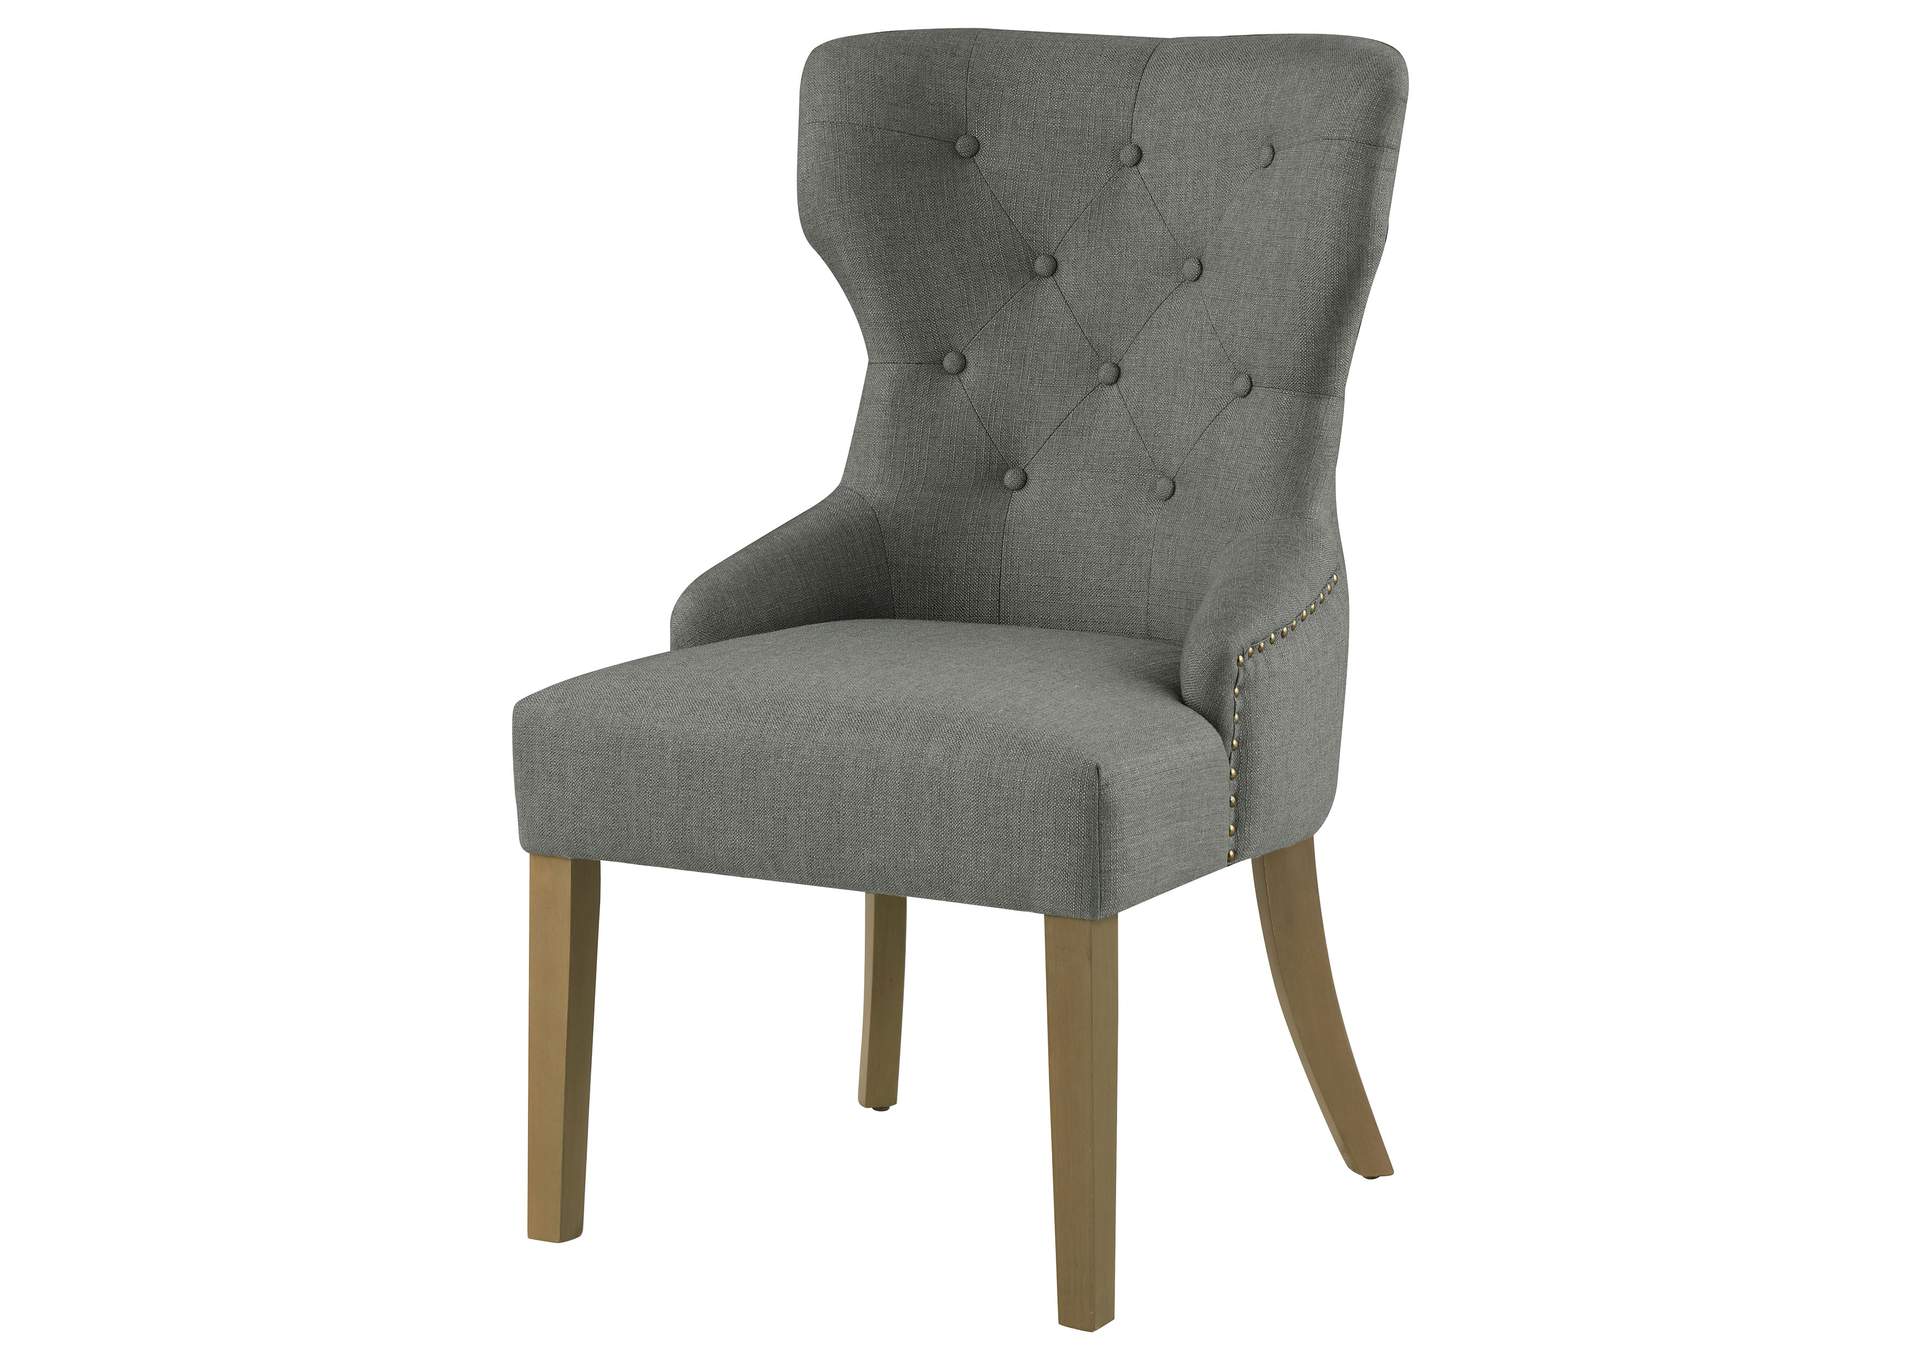 Baney Tufted Upholstered Dining Chair Grey,Coaster Furniture